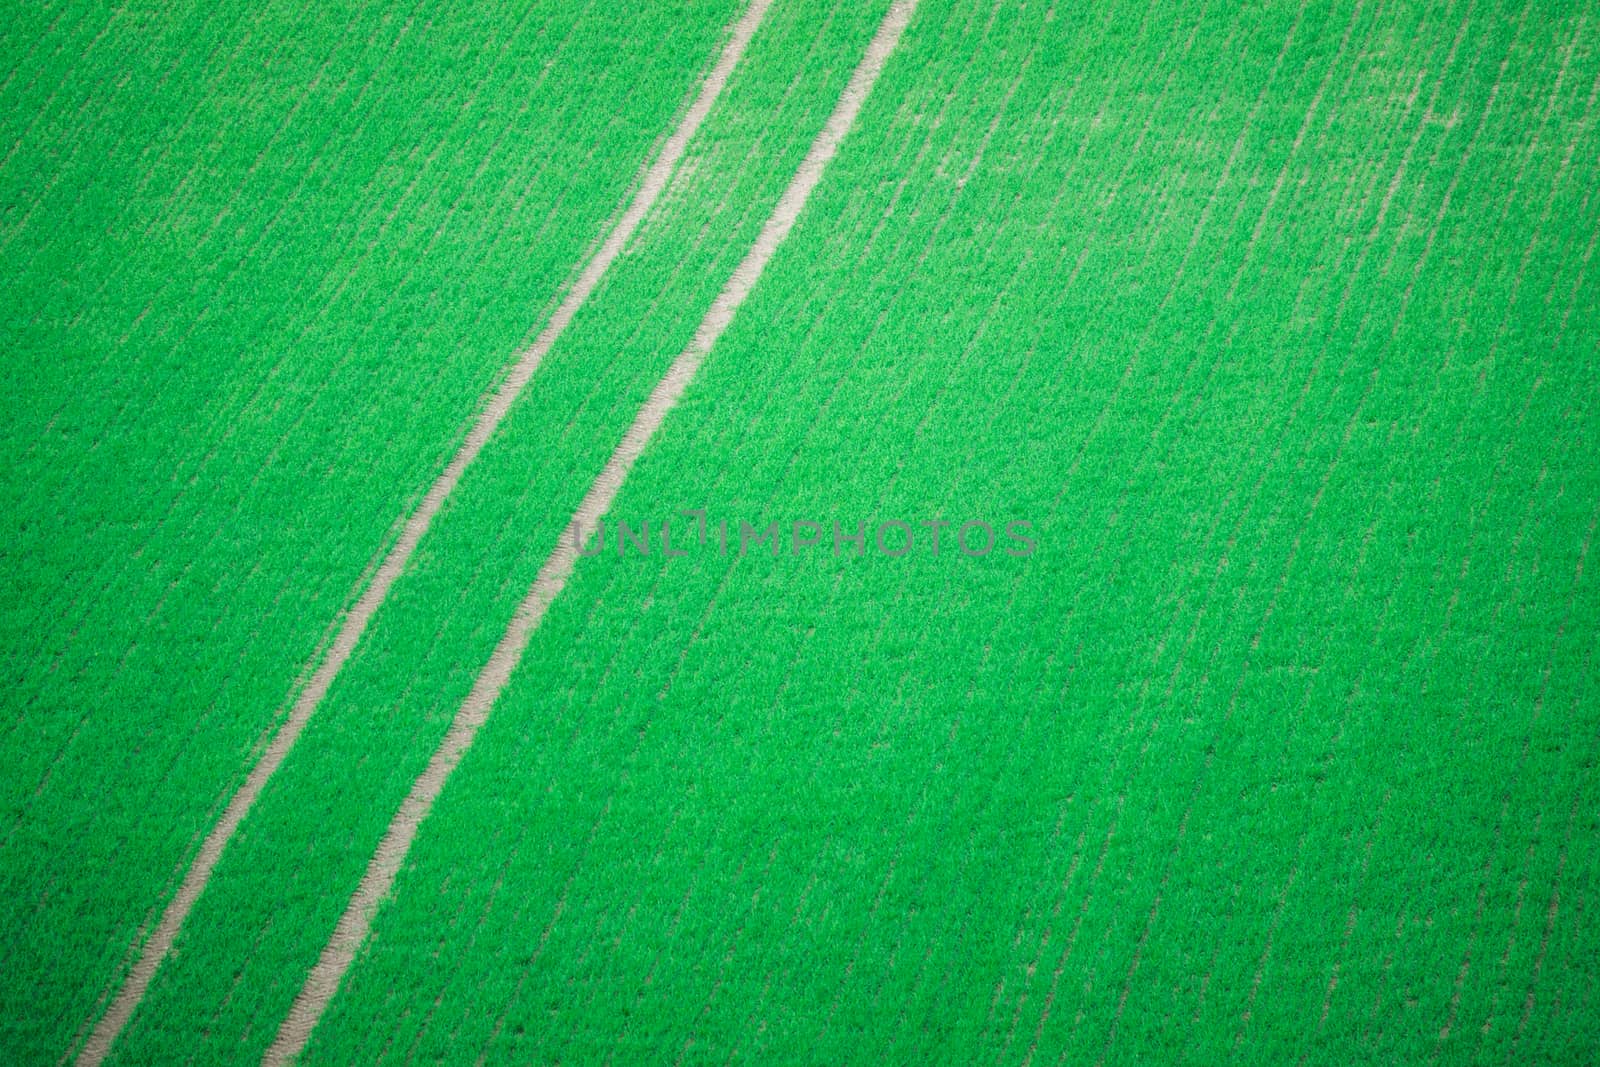 Abstract Background Texture Of Tractor Tracks Through A Field Of Crops With Copy Space